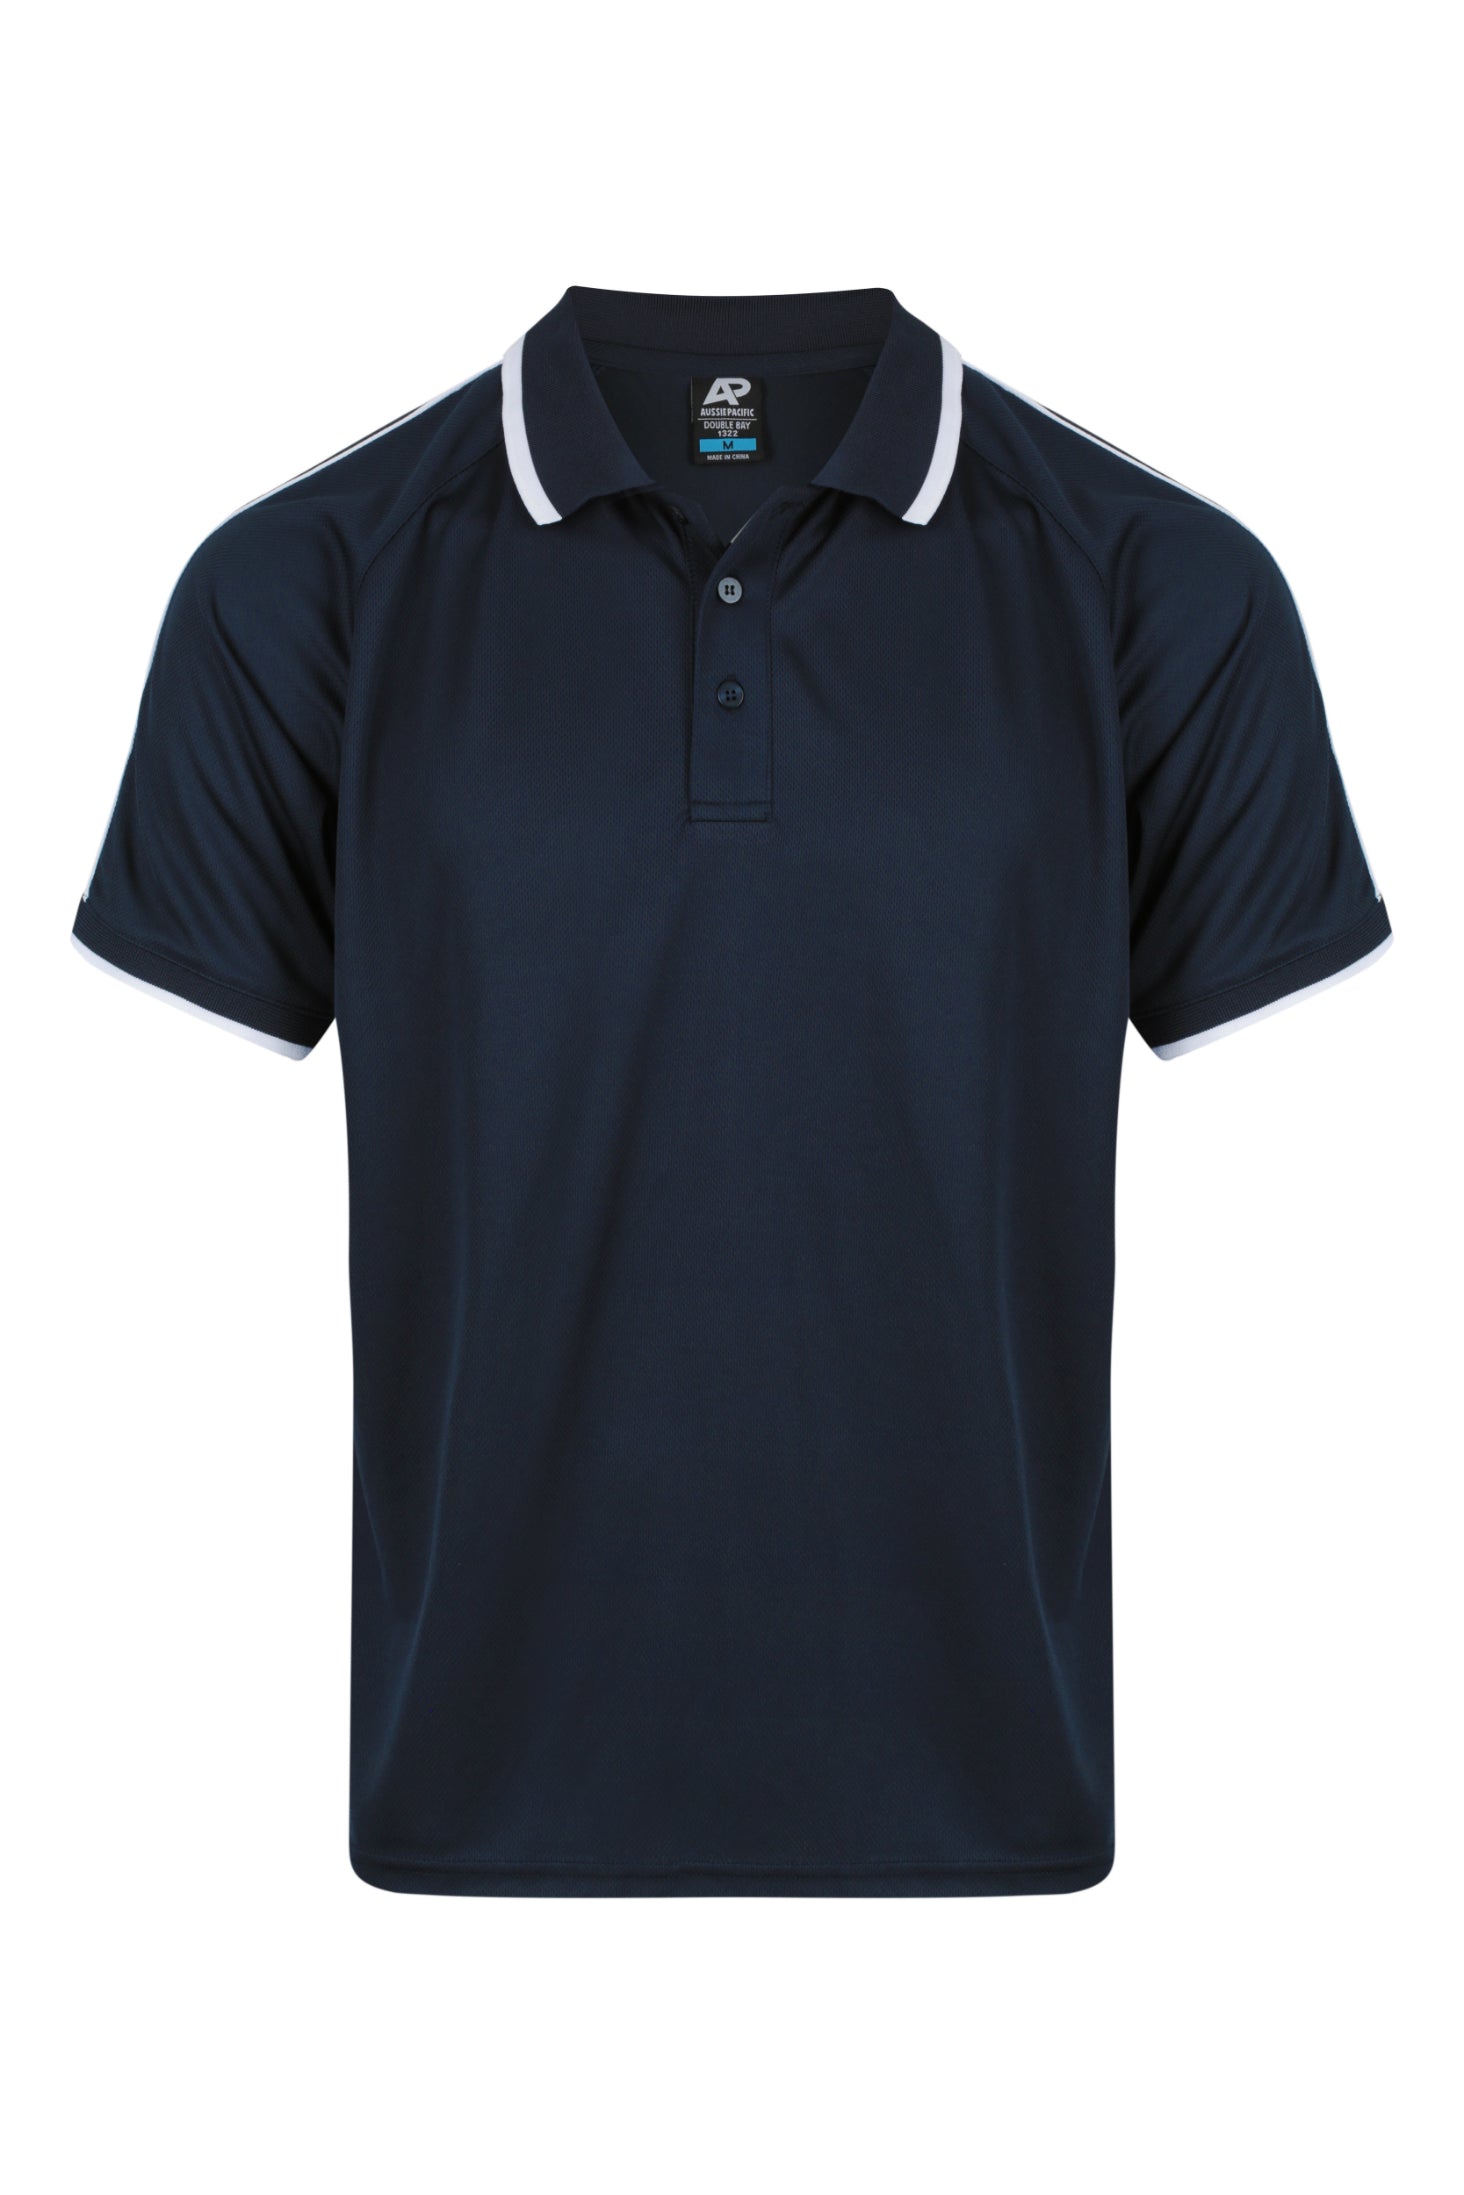 DOUBLE BAY MENS POLOS - 1322-Aussie Pacific-5